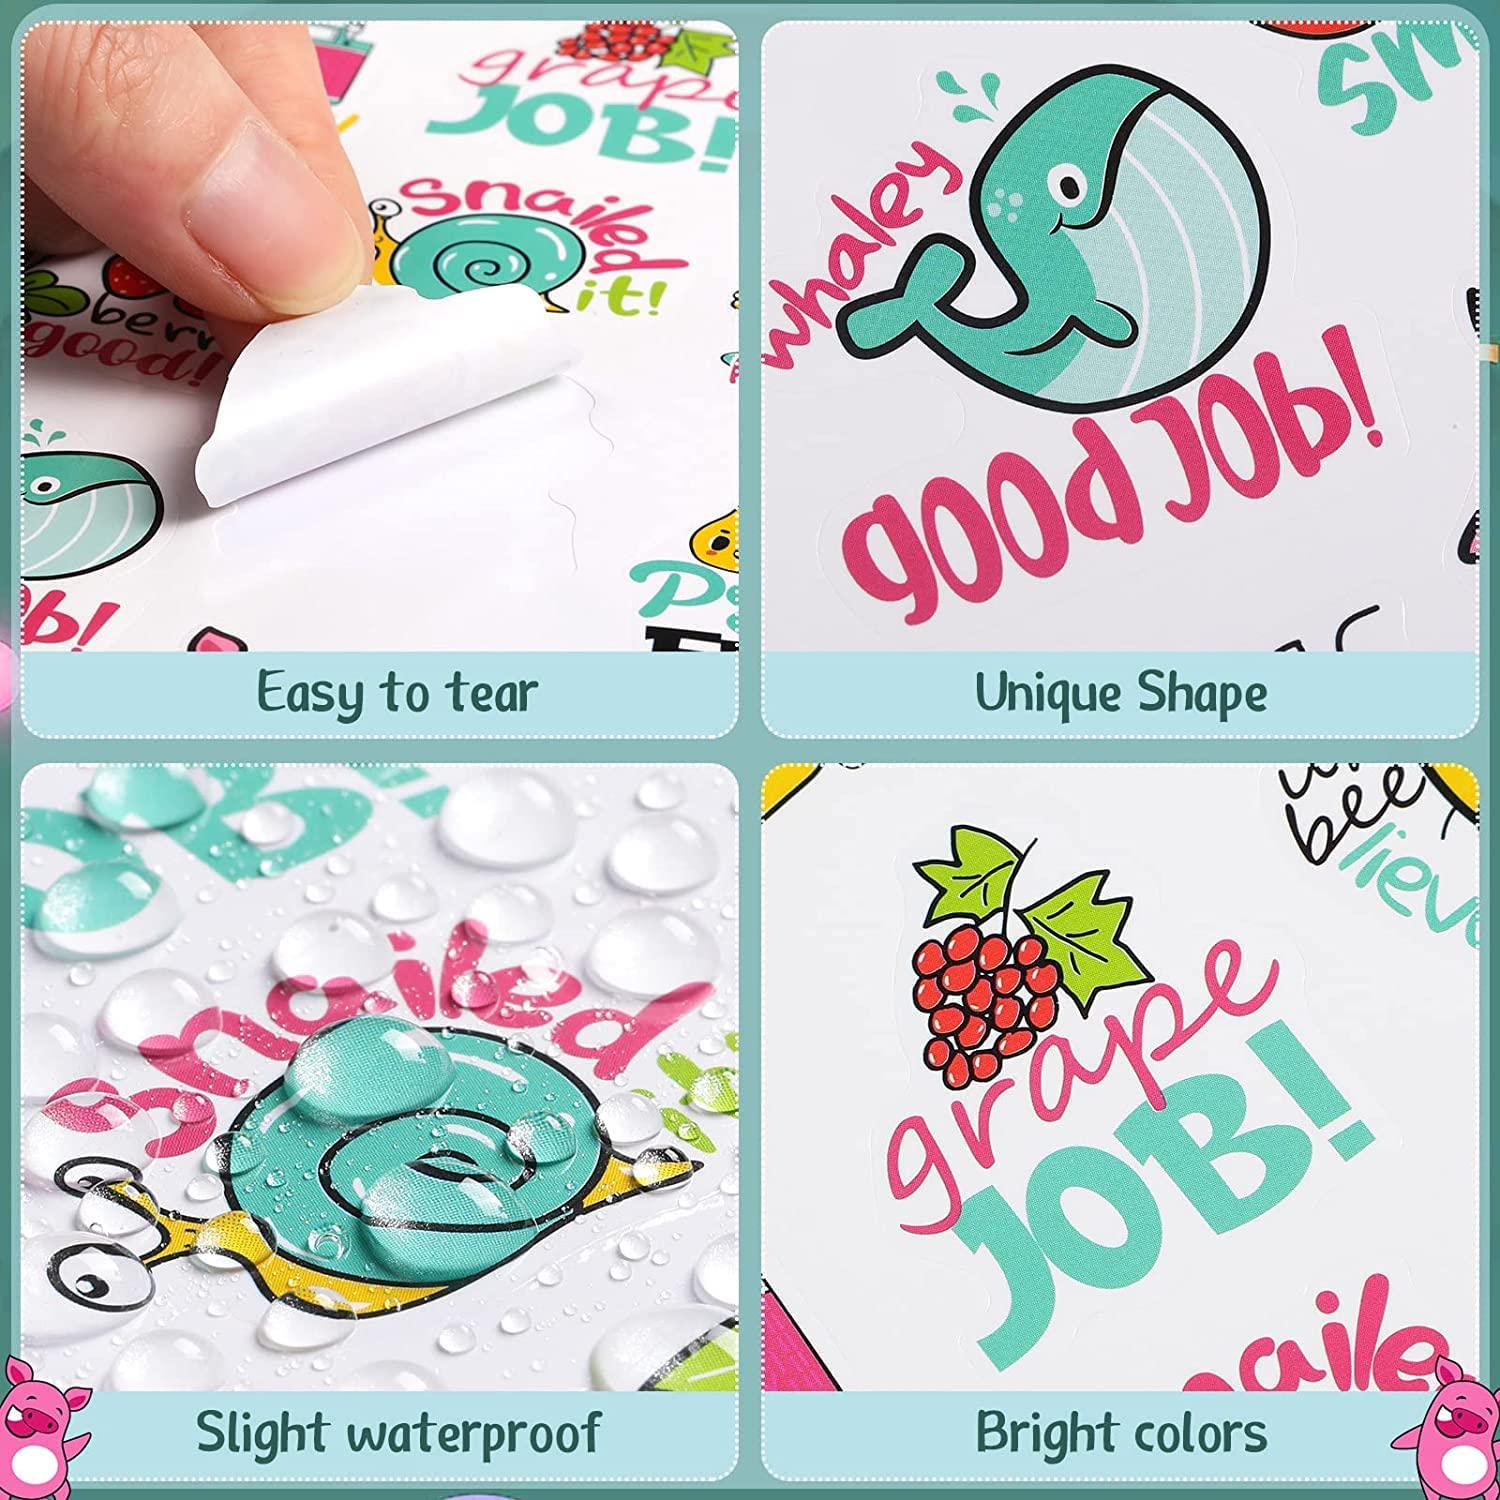 Stickers with cartoon shapes and motivational words